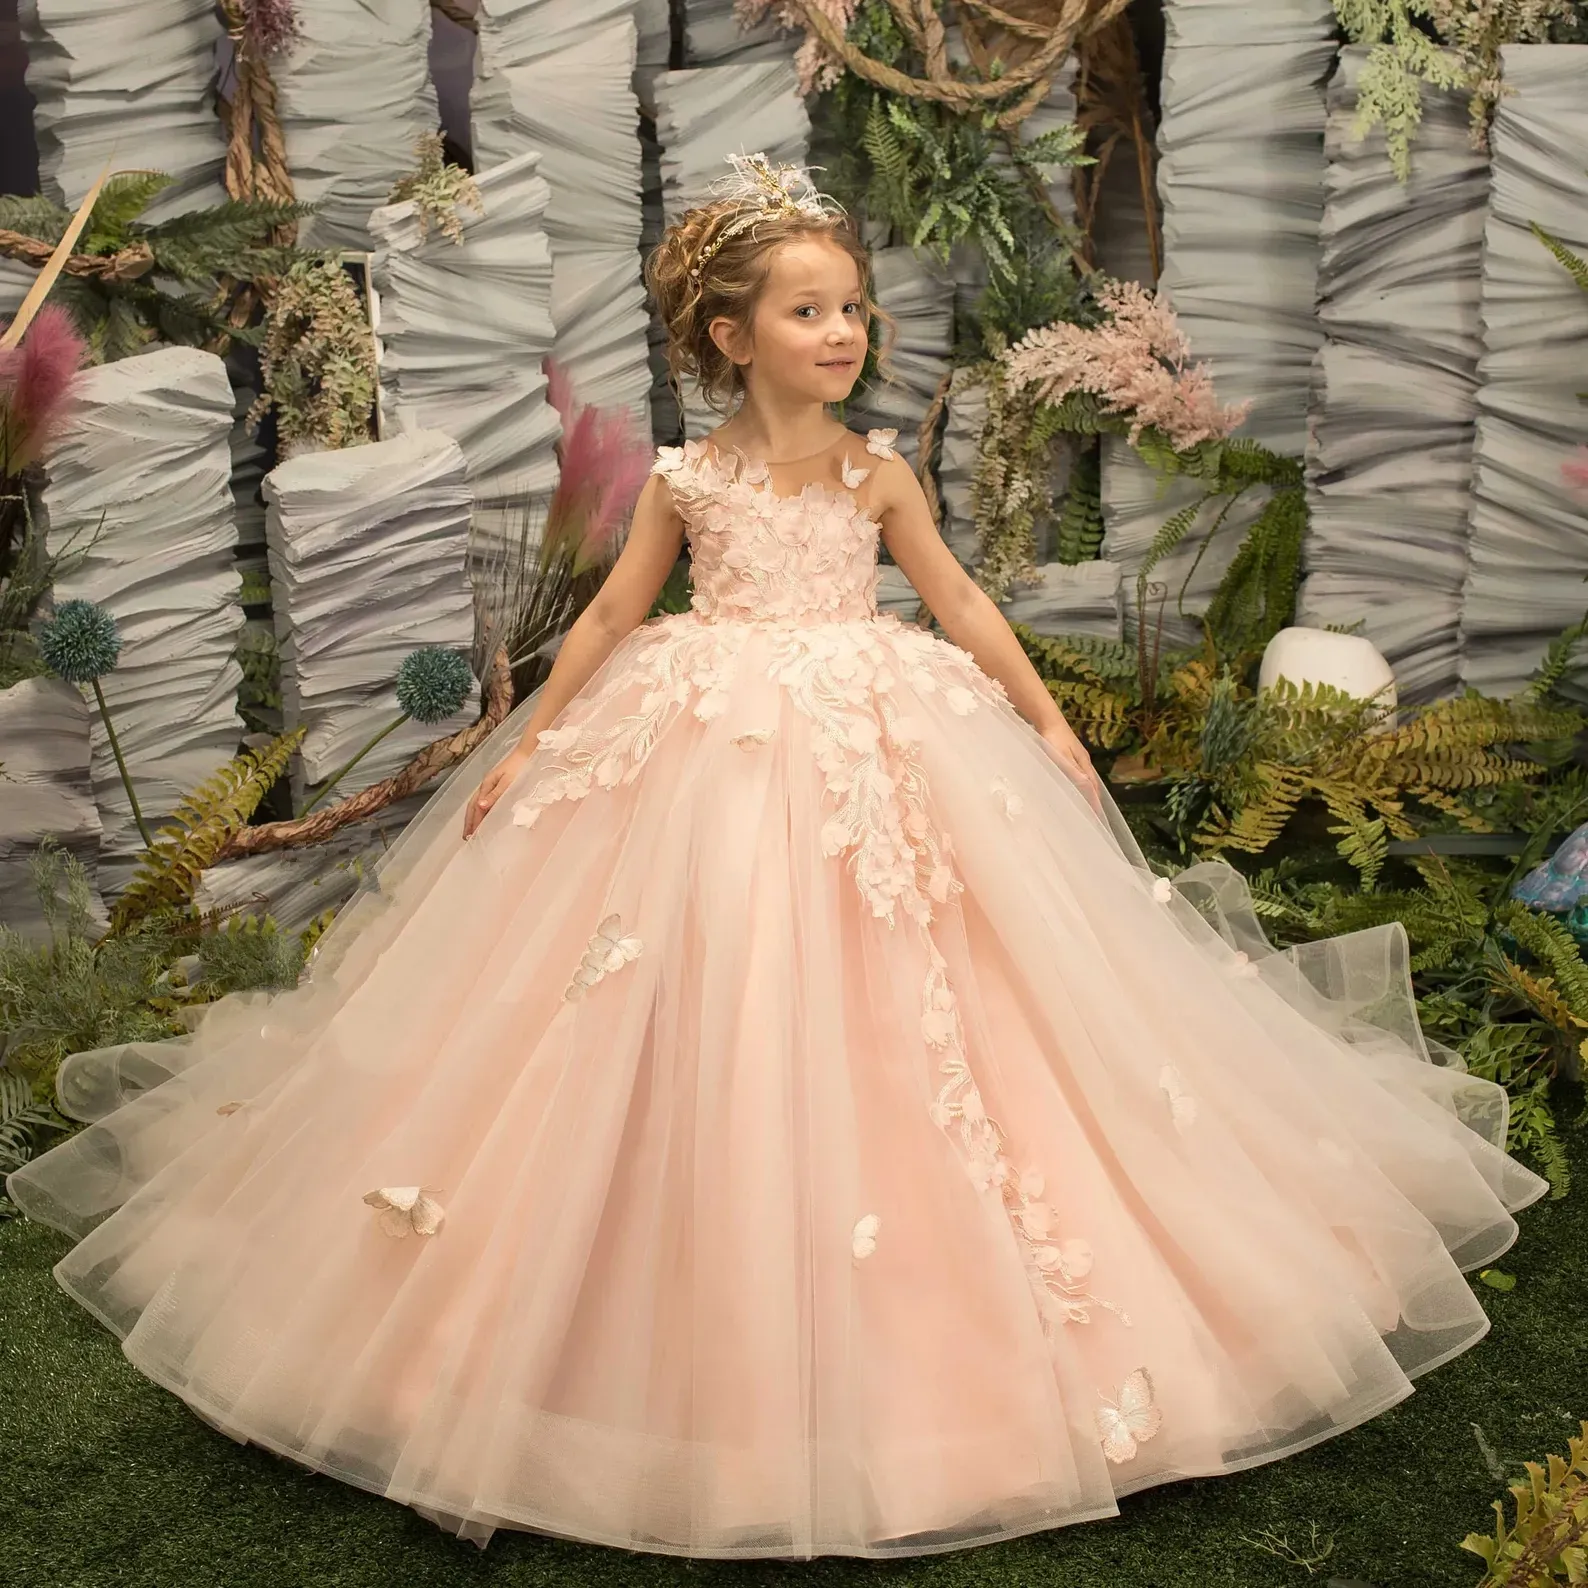 Peach Flower Girl Dress 2024 Lilac Ivory Tulle Lace Ballgown First Communion Gown Little Kid Infant Toddler Christening Baptism Junior Bridesmaid Wedding Guest